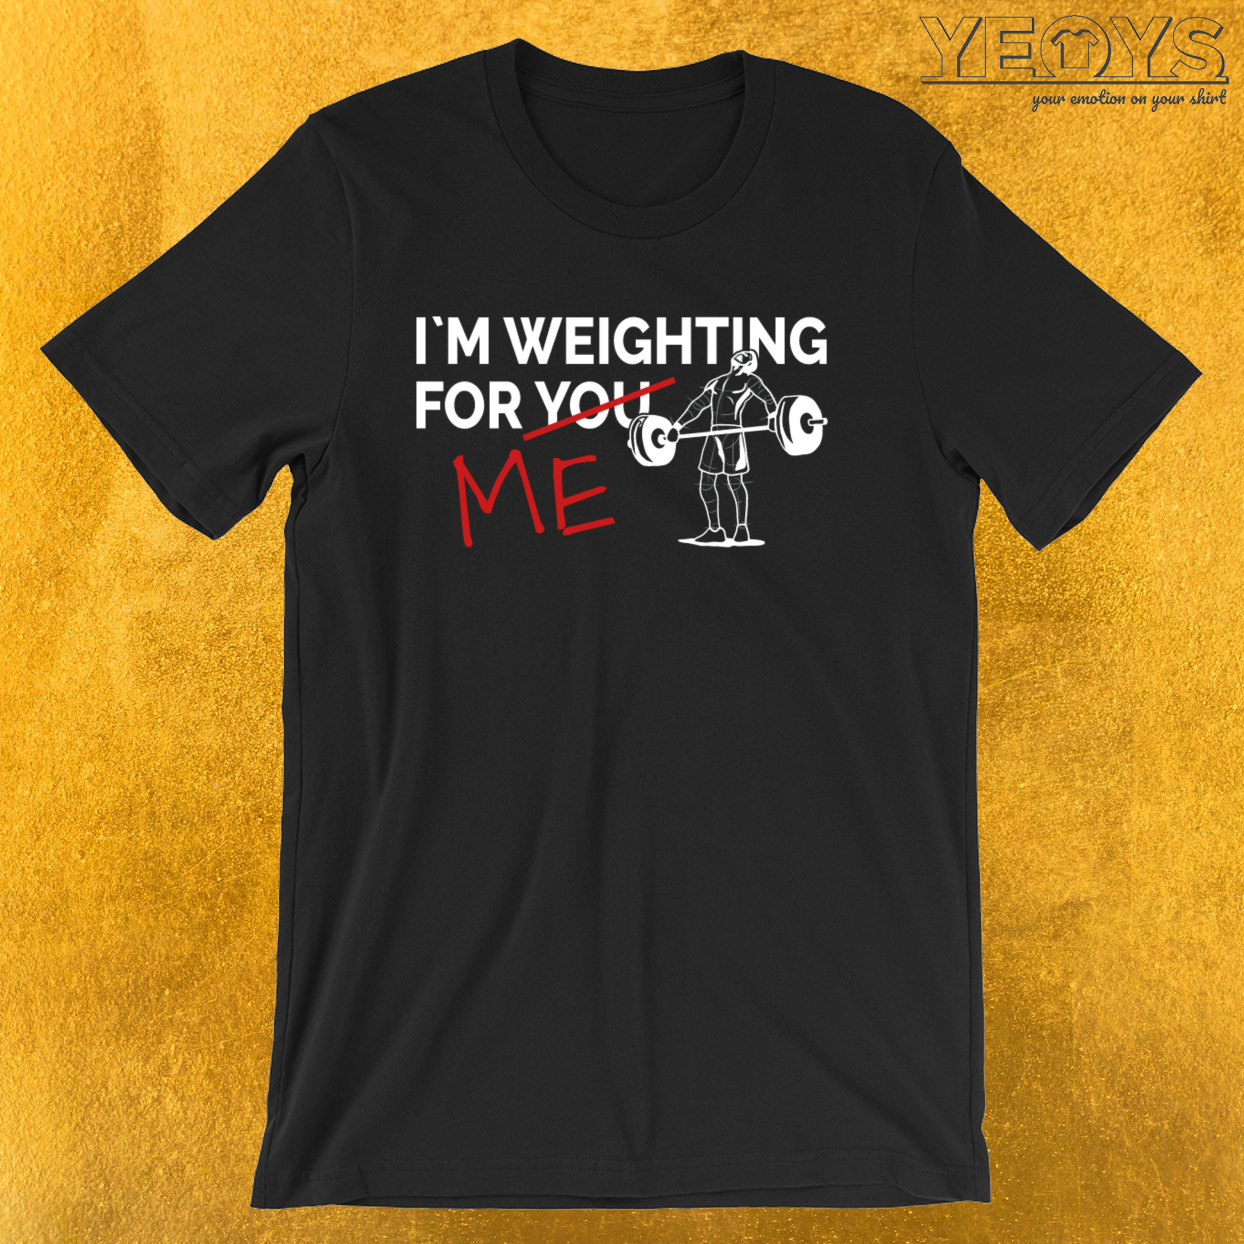 I Am Weighting For You Me – Weightlifting Tee